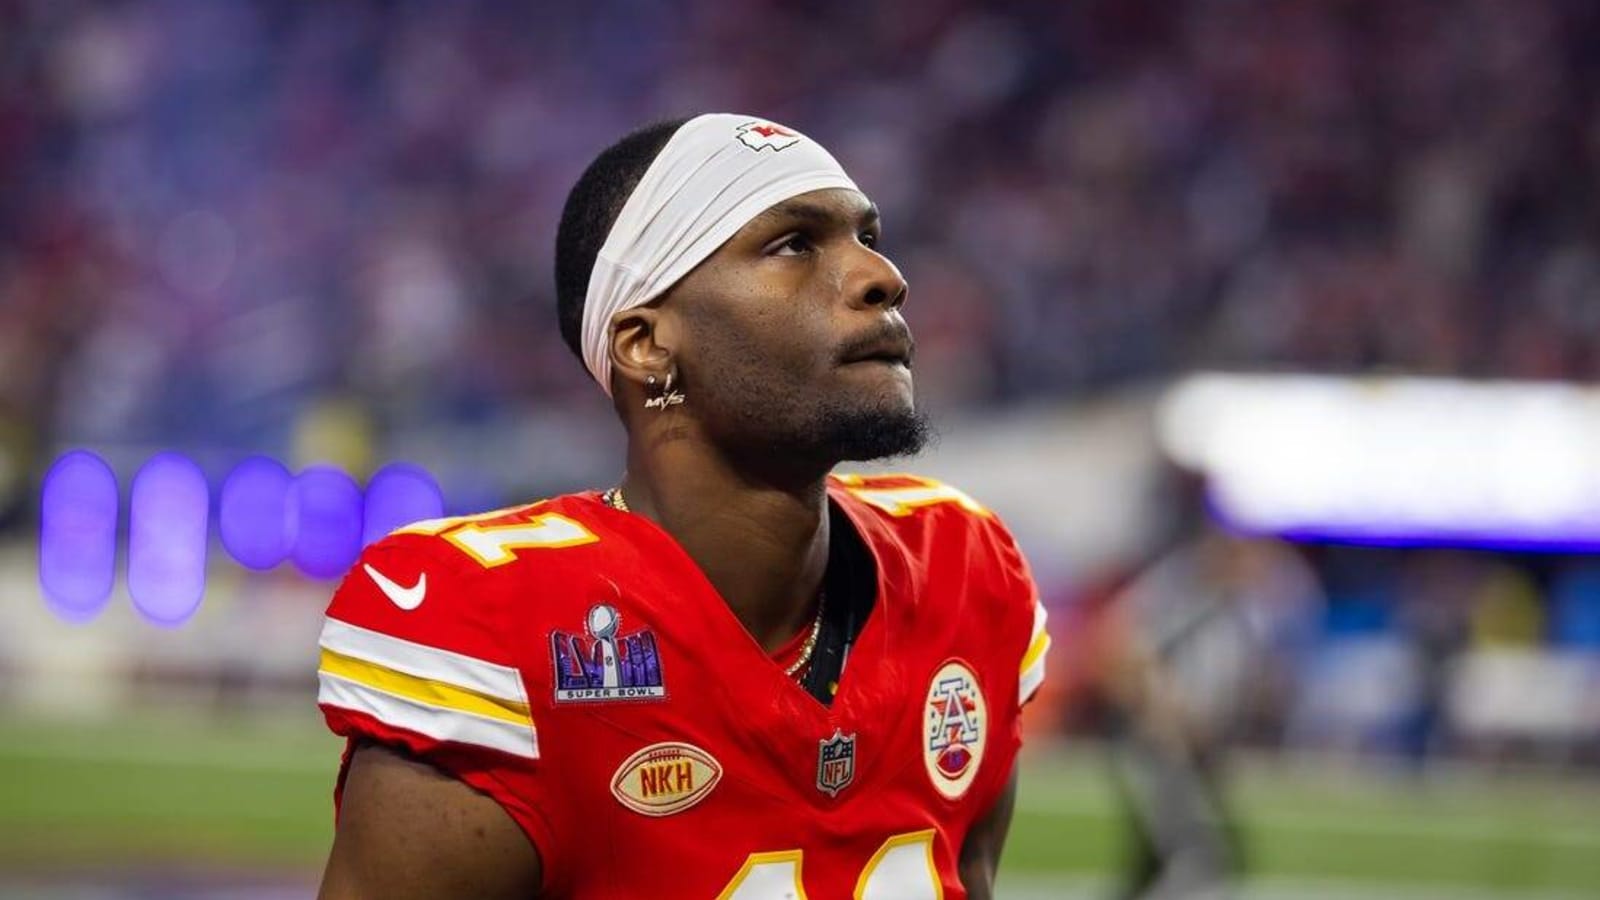 Reports: Chiefs releasing WR Marquez Valdes-Scantling